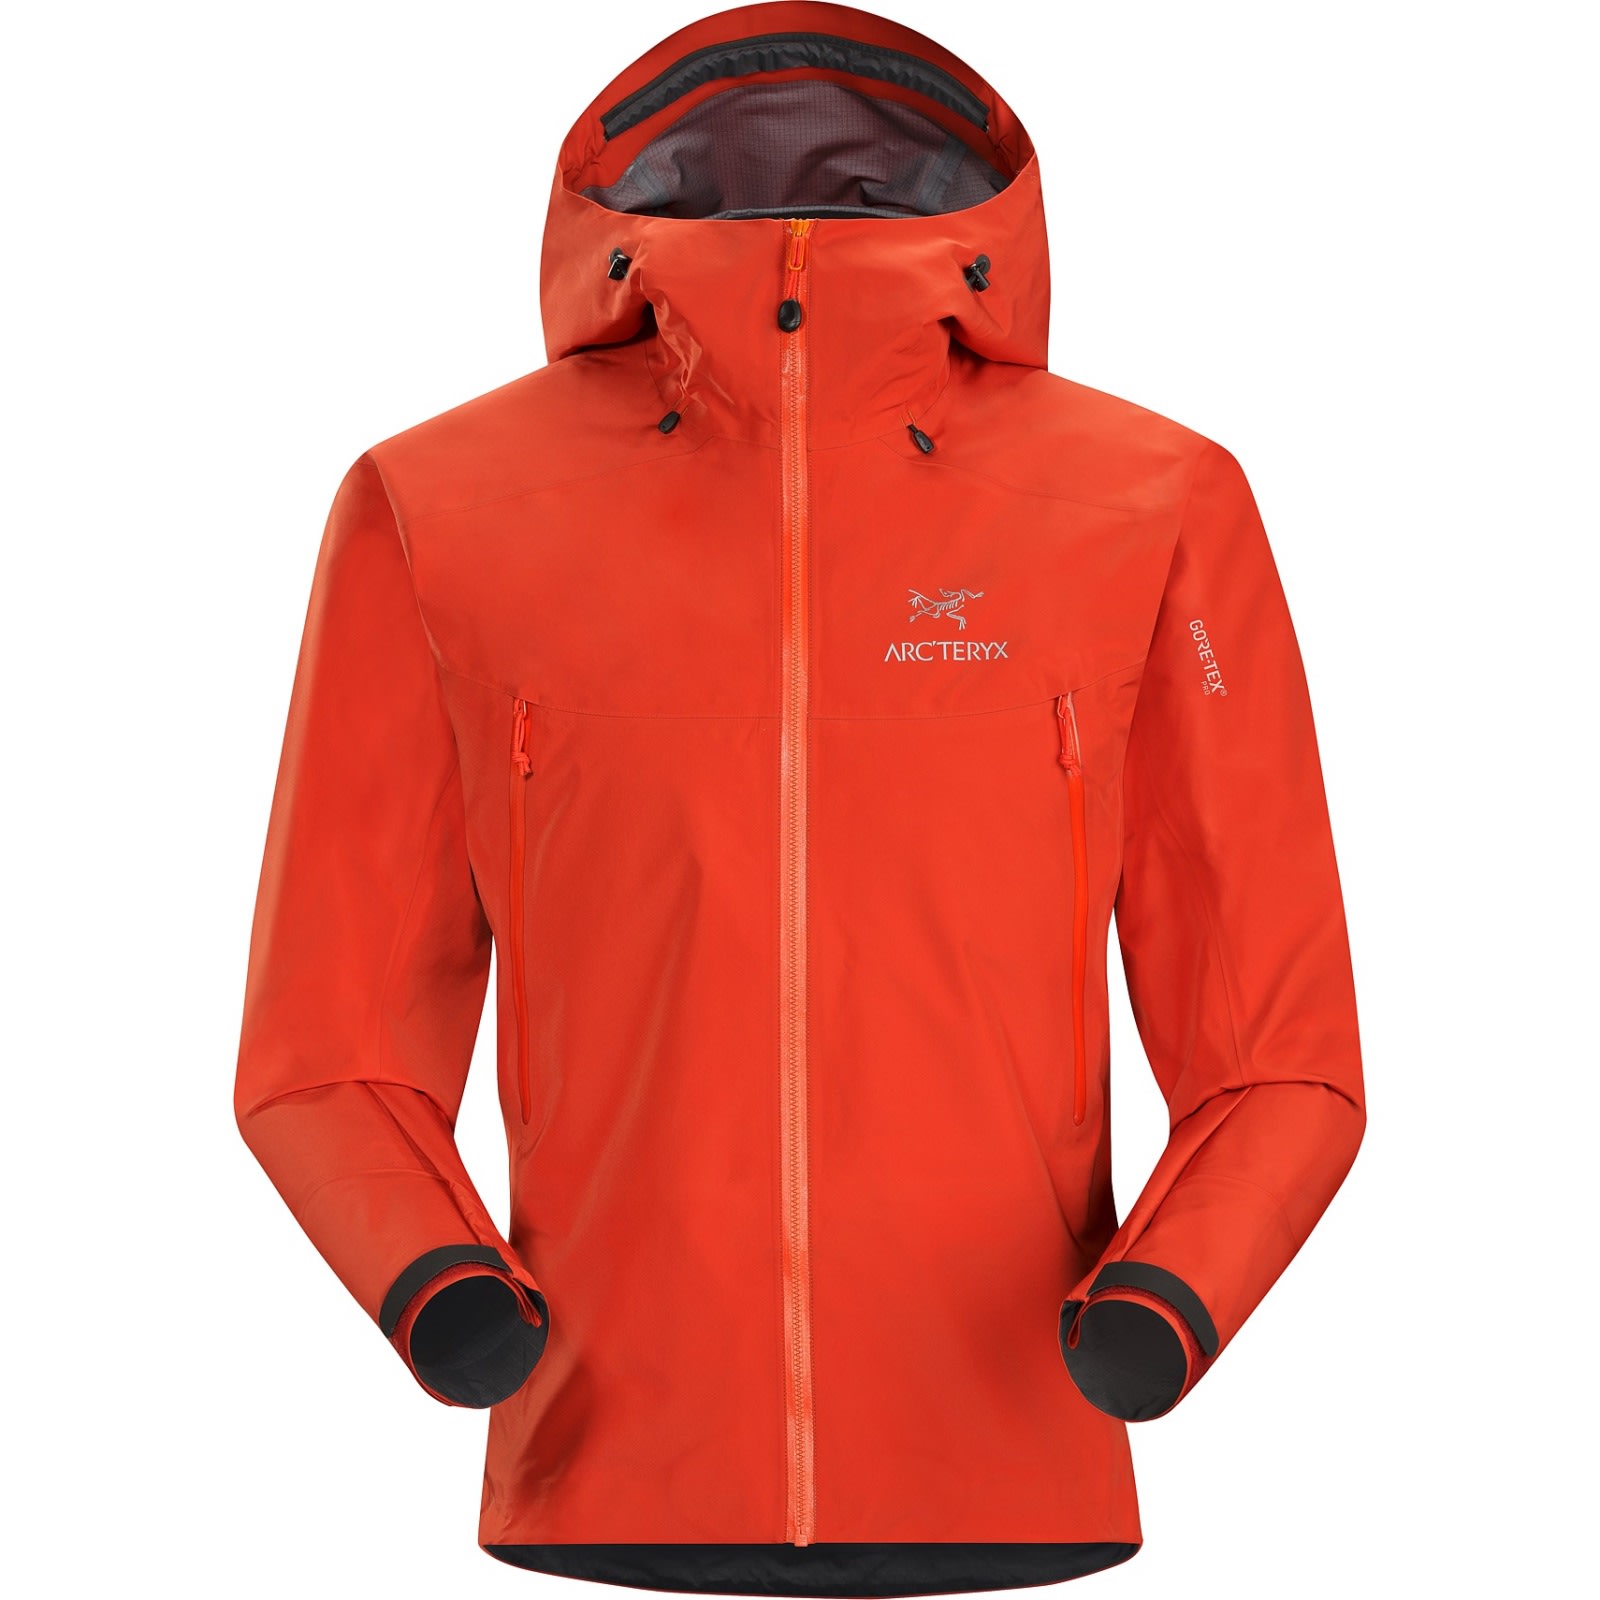 Buy Arc'teryx Men's Beta LT Jacket from Outnorth